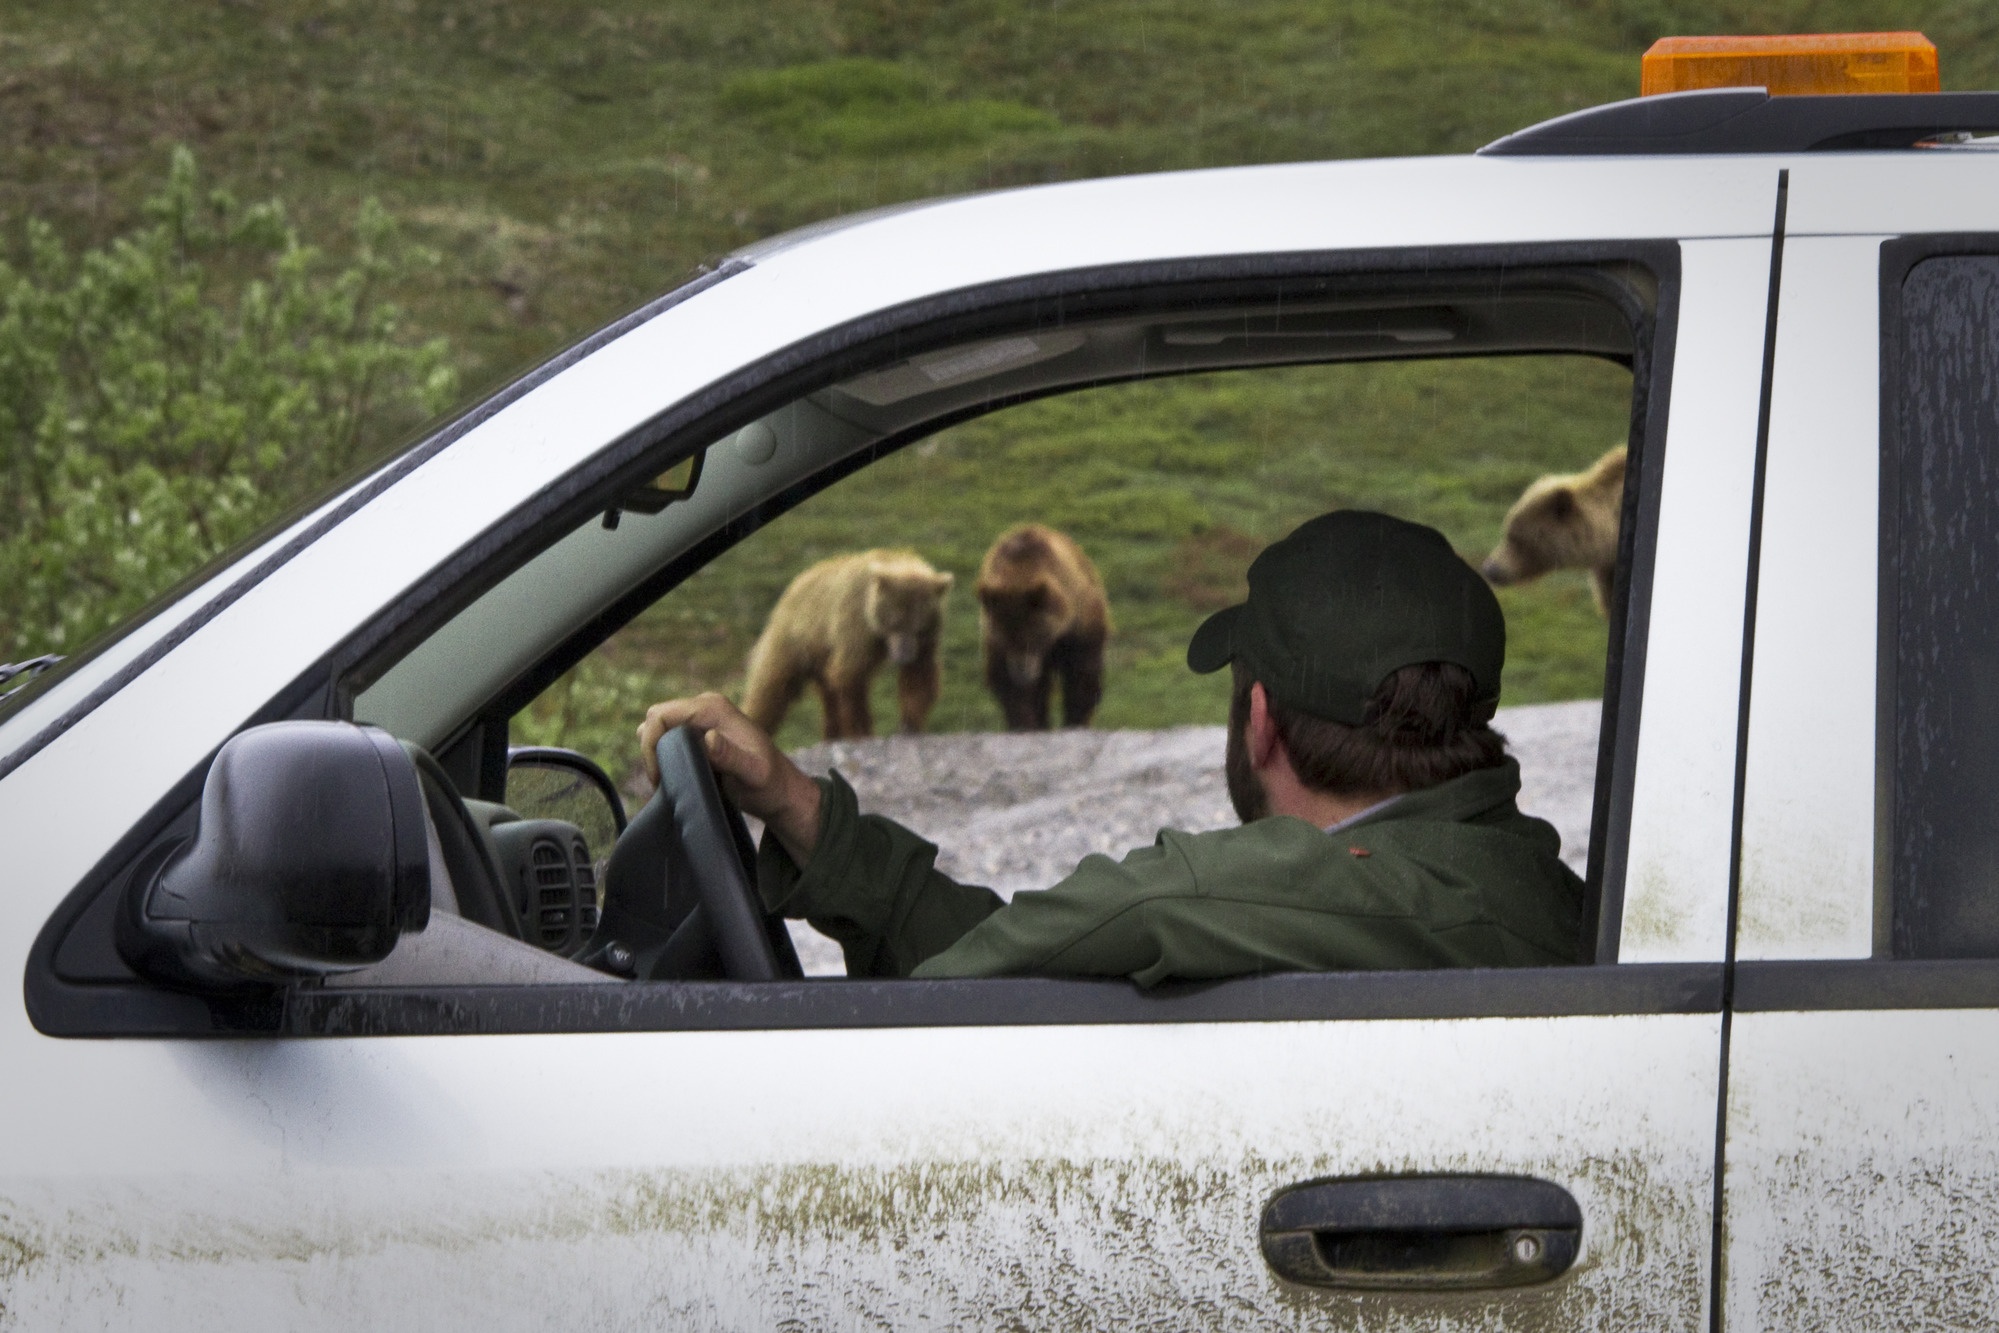 a park ranger in a vehicle looking at three grizzly bears